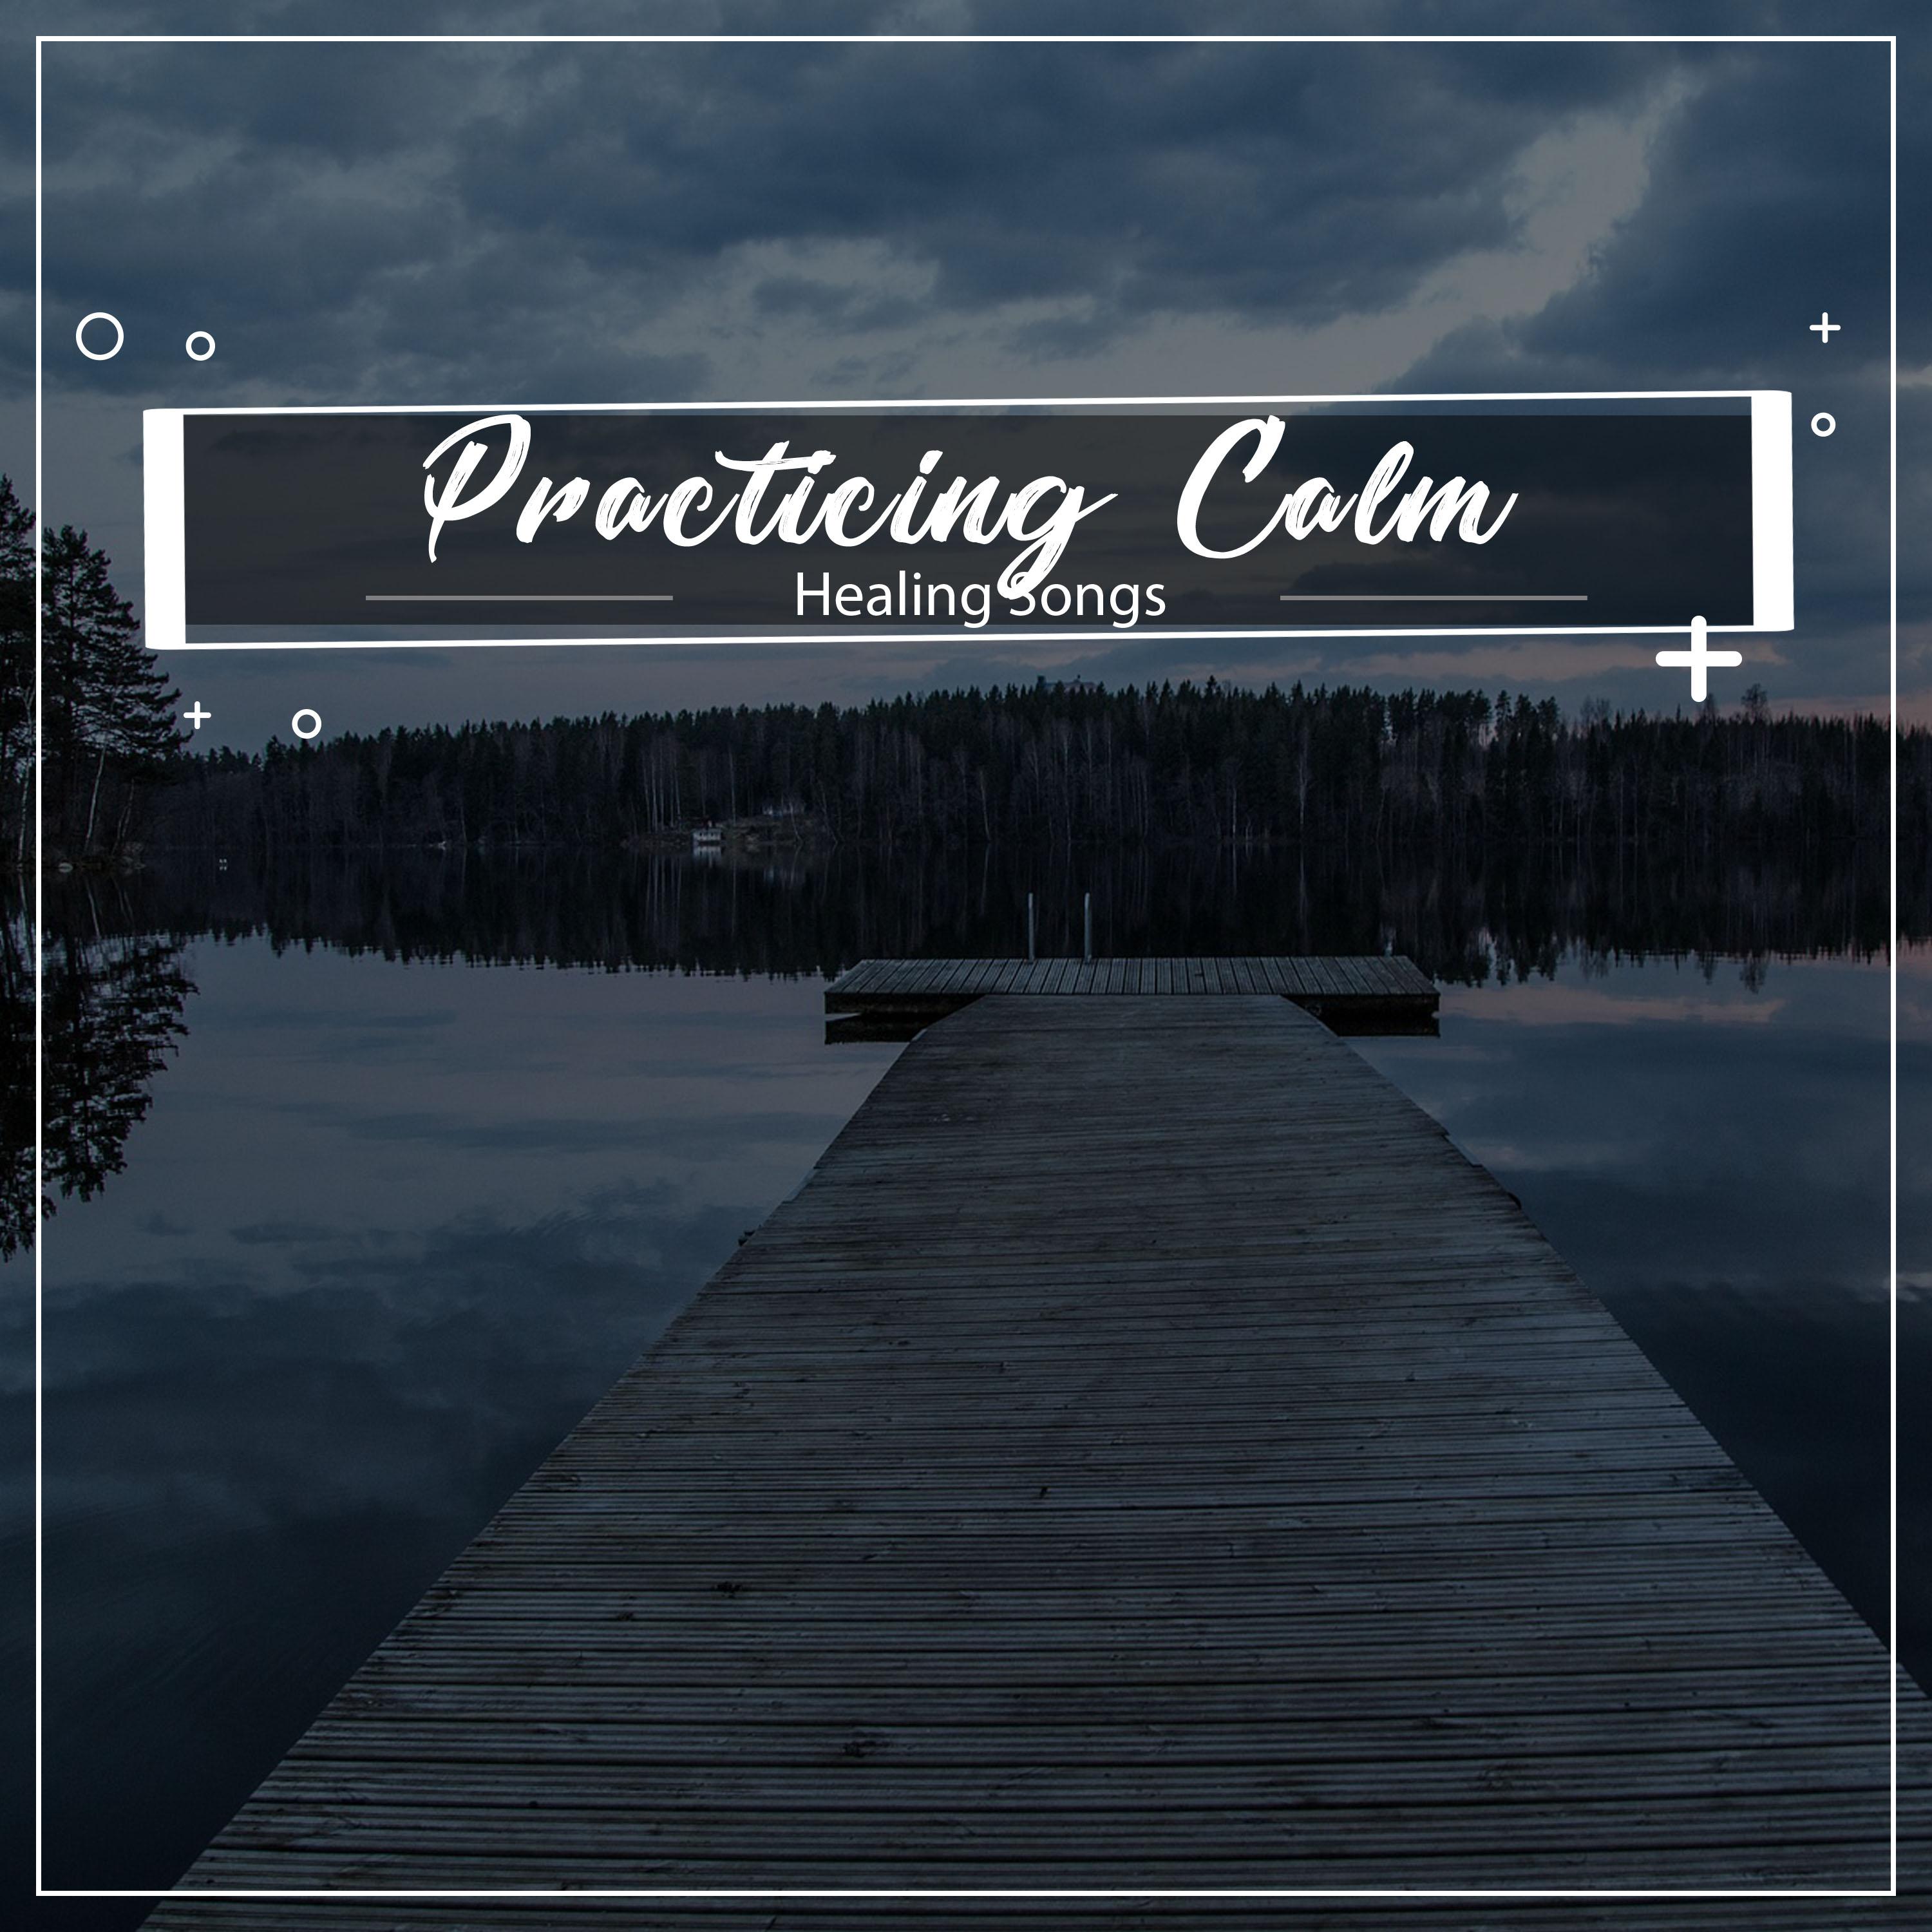 10 Relaxing Ambience Noises for Practicing Calm